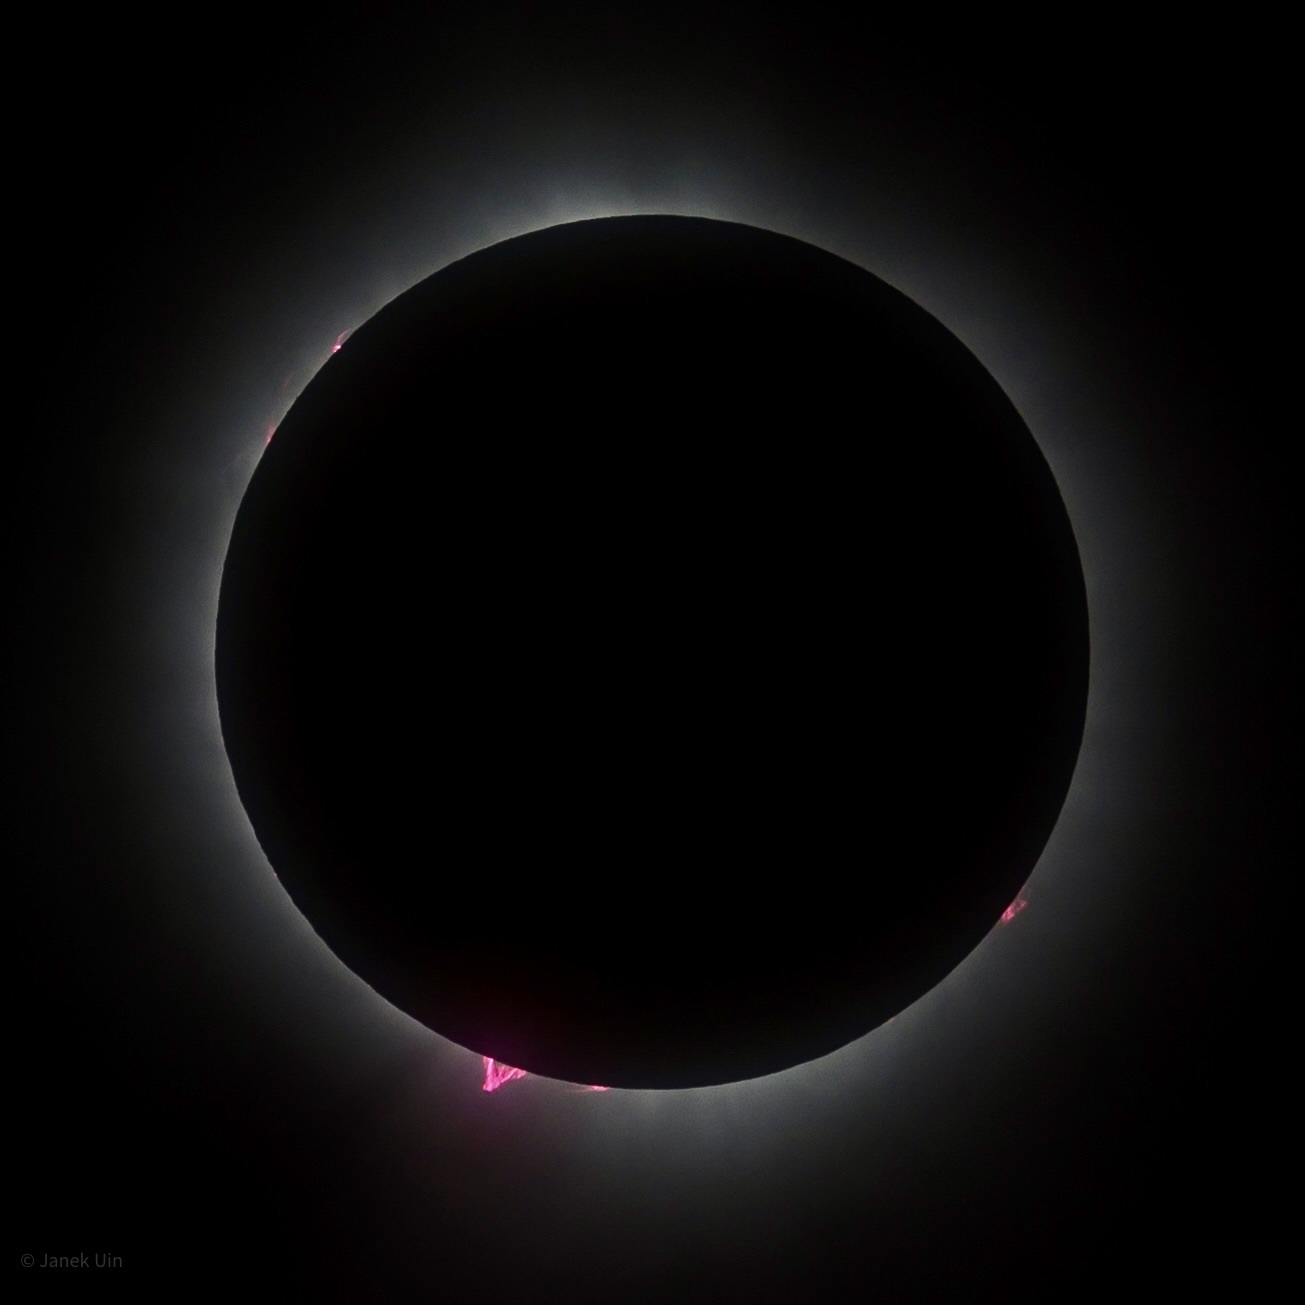 Janek Uin, an ARM aerosol instrument mentor at Brookhaven National Laboratory, took this 2024 eclipse photo in the path of totality by Durant Lake in the Adirondack Mountains of upstate New York. The photo captures several pink bursts, which are called solar prominences. NASA defines a solar prominence as “a large, bright feature extending outward from the sun’s surface.”